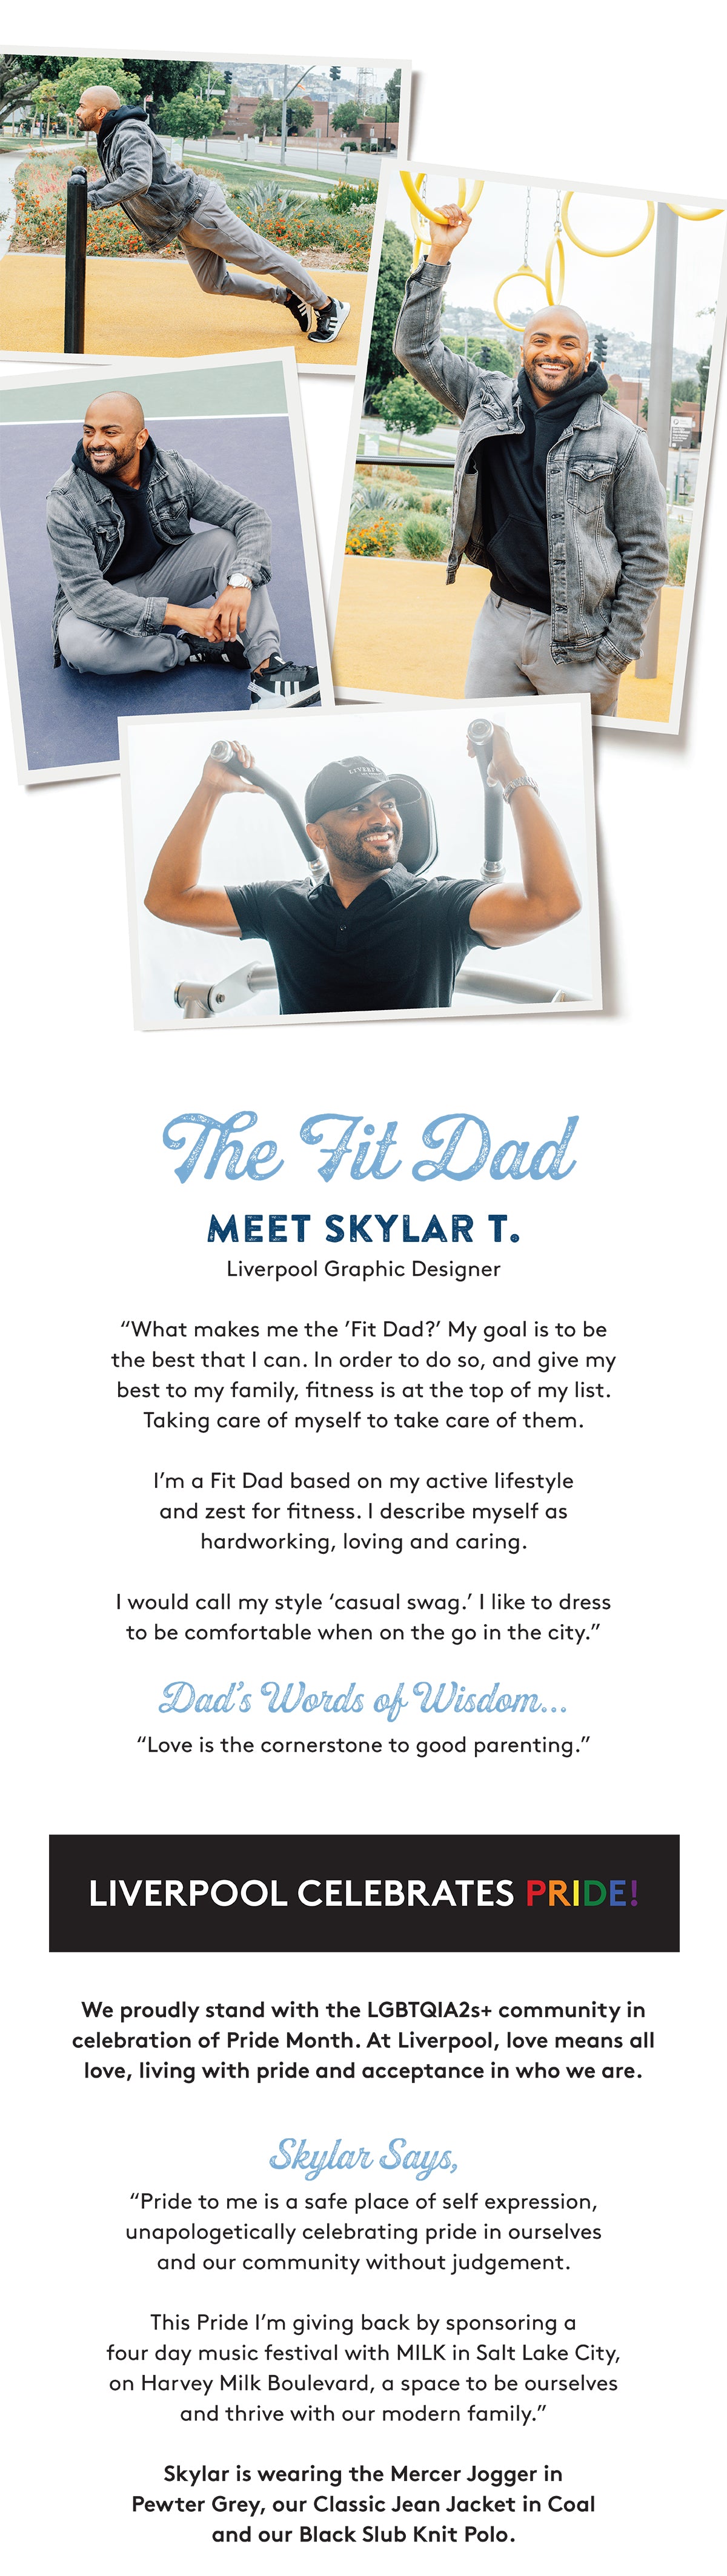 The Tit Dad MEET SKYLAR T. Liverpool Graphic Designer "What makes me the 'Fit Dad?' My goal is to be the best that I can. In order to do so, and give my best to my family, fitness is at the top of my list. Taking care of myself to take care of them. I'm a Fit Dad based on my active lifestyle and zest for fitness. I describe myself as hardworking, loving and caring. I would call my style 'casual swag.' I like to dress to be comfortable when on the go in the city. Dad's Words of Wisdom... "Love is the cornerstone to good parenting. LIVERPOOL CELEBRATES PRIDE! We proudly stand with the LGBTQIA2s+ community in celebration of Pride Month. At Liverpool, love means all love, living with pride and acceptance in who we are. Skylar Says, "Pride to me is a safe place of self expression, unapologetically celebrating pride in ourselves and our community without judgement. This Pride I'm giving back by sponsoring a four day music festival with MILK in Salt Lake City, on Harvey Milk Boulevard, a space to be ourselves and thrive with our modern family. Skylar is wearing the Mercer Jogger in Pewter Grey, our Classic Jean Jacket in Coal and our Black Slub Knit Polo.